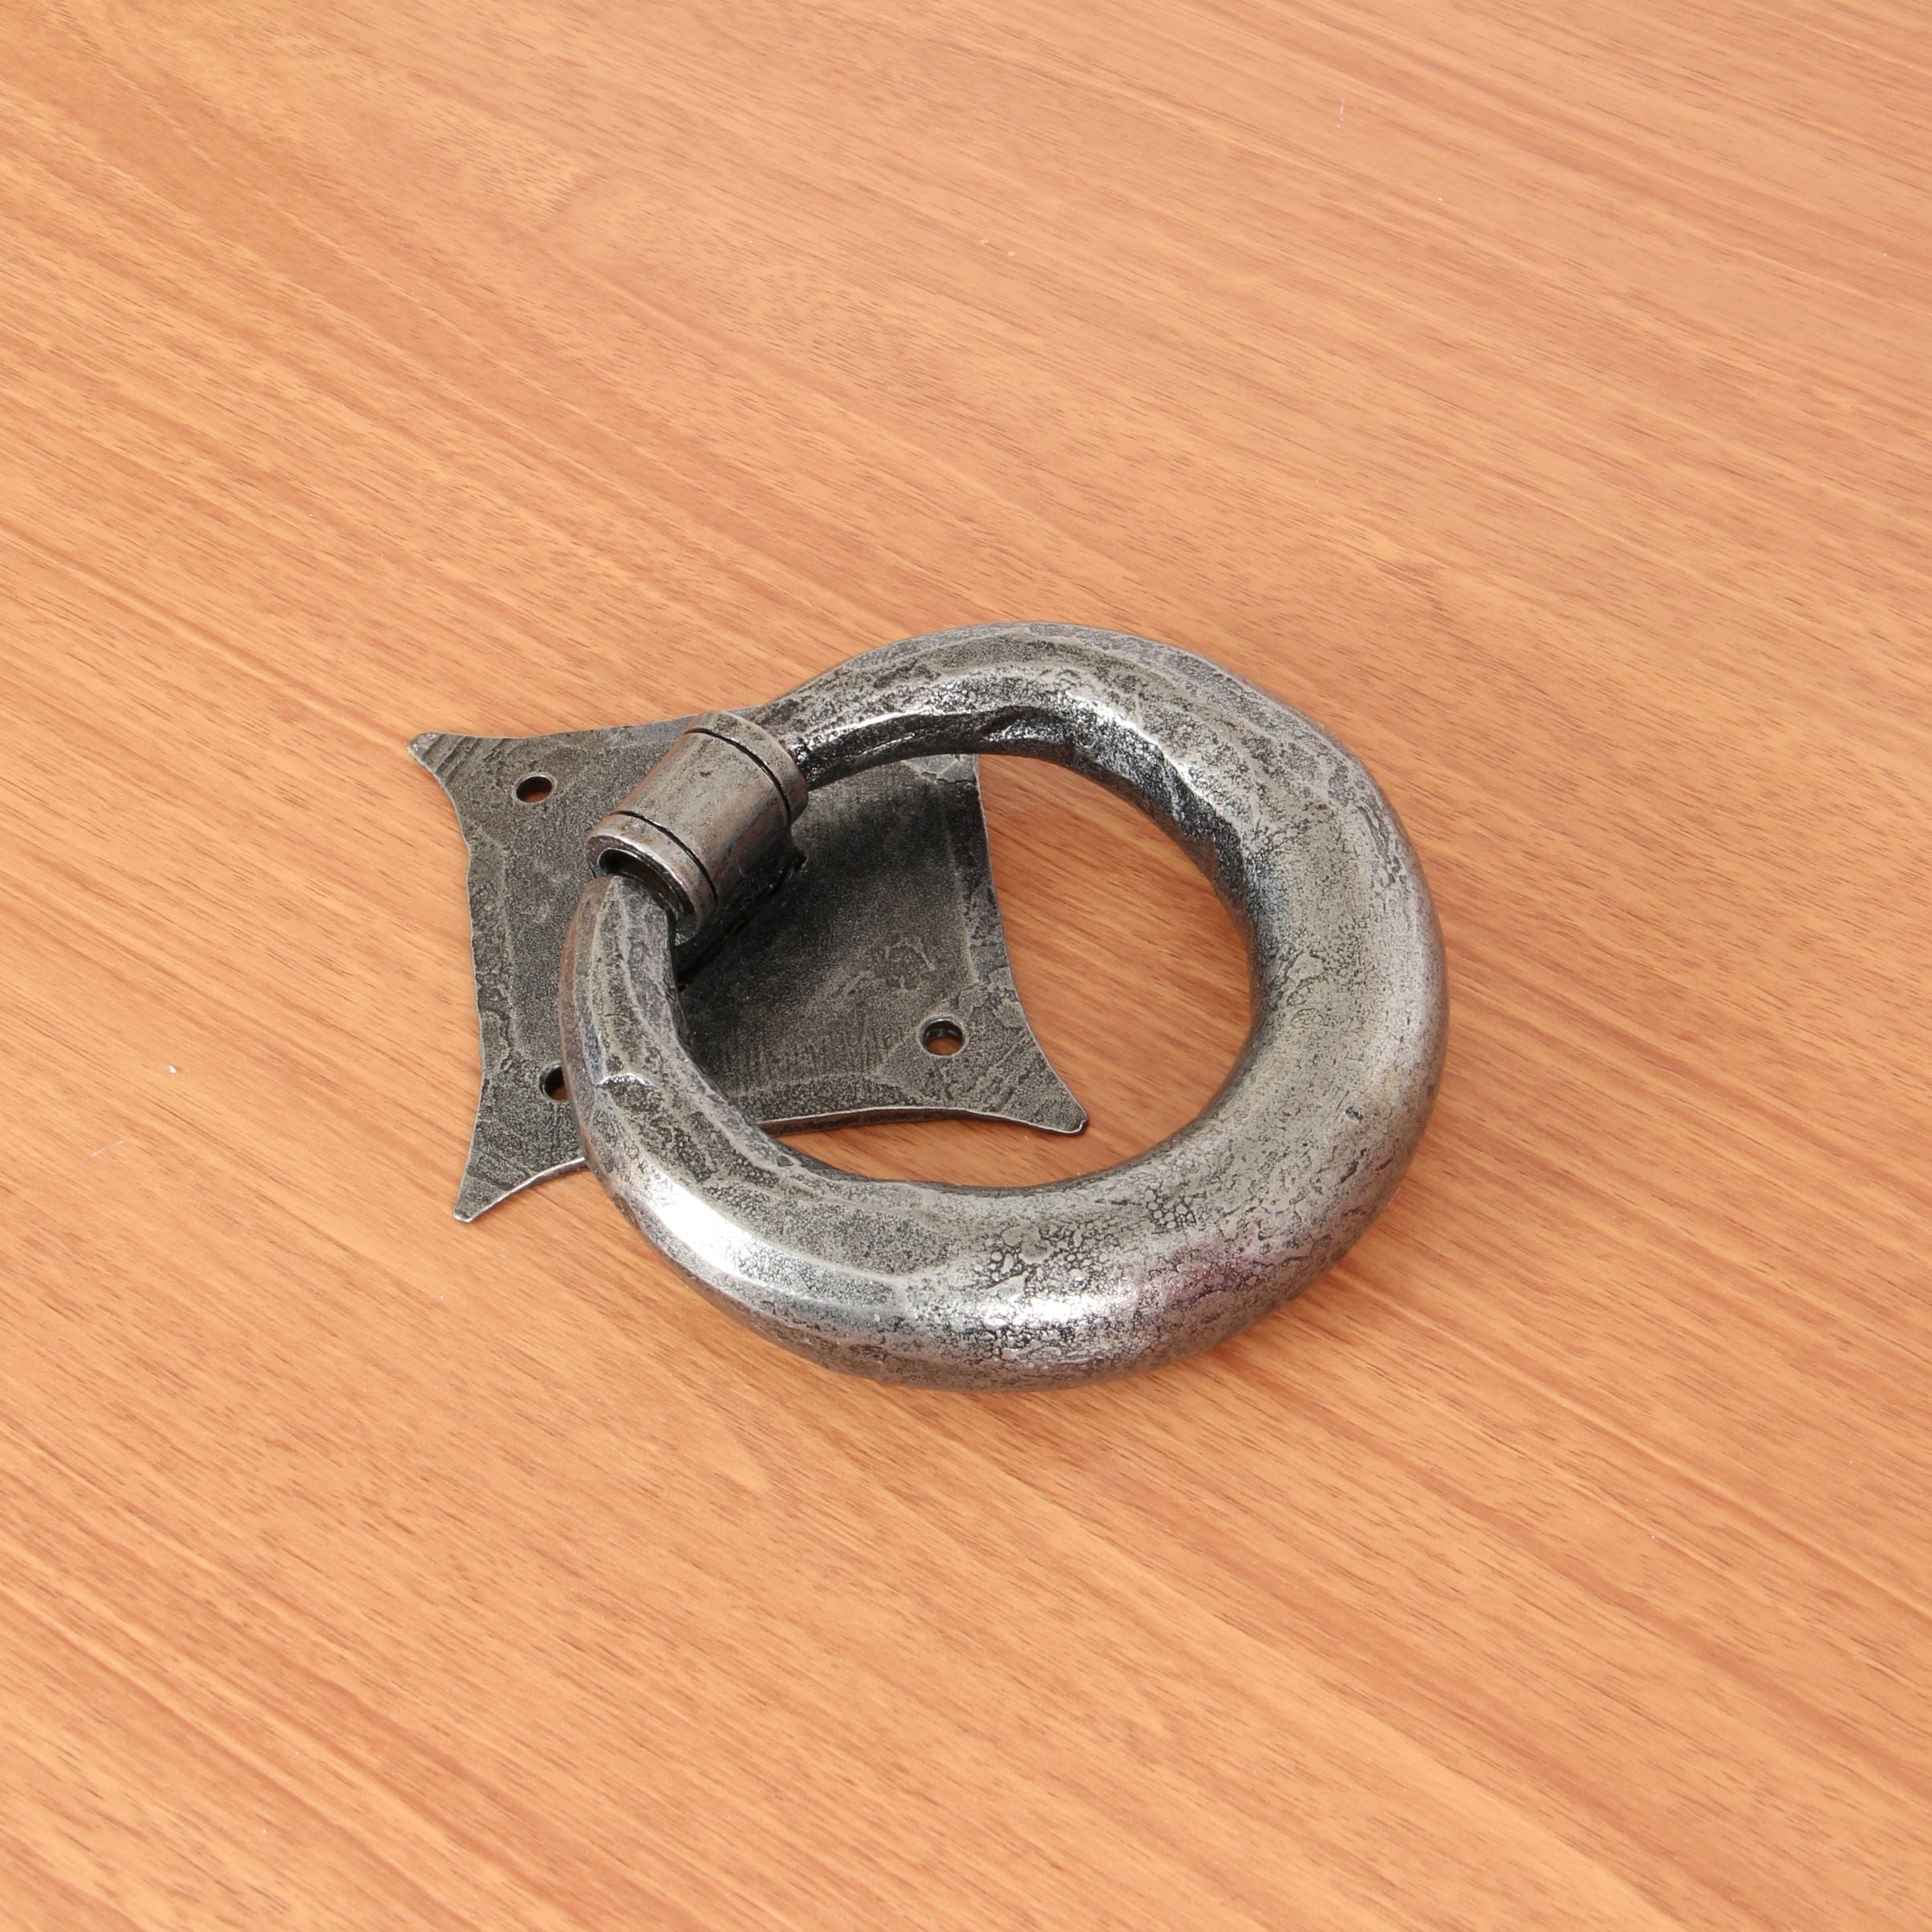 From The Anvil's Pewter Ring door knocker positioned on a wooden door.